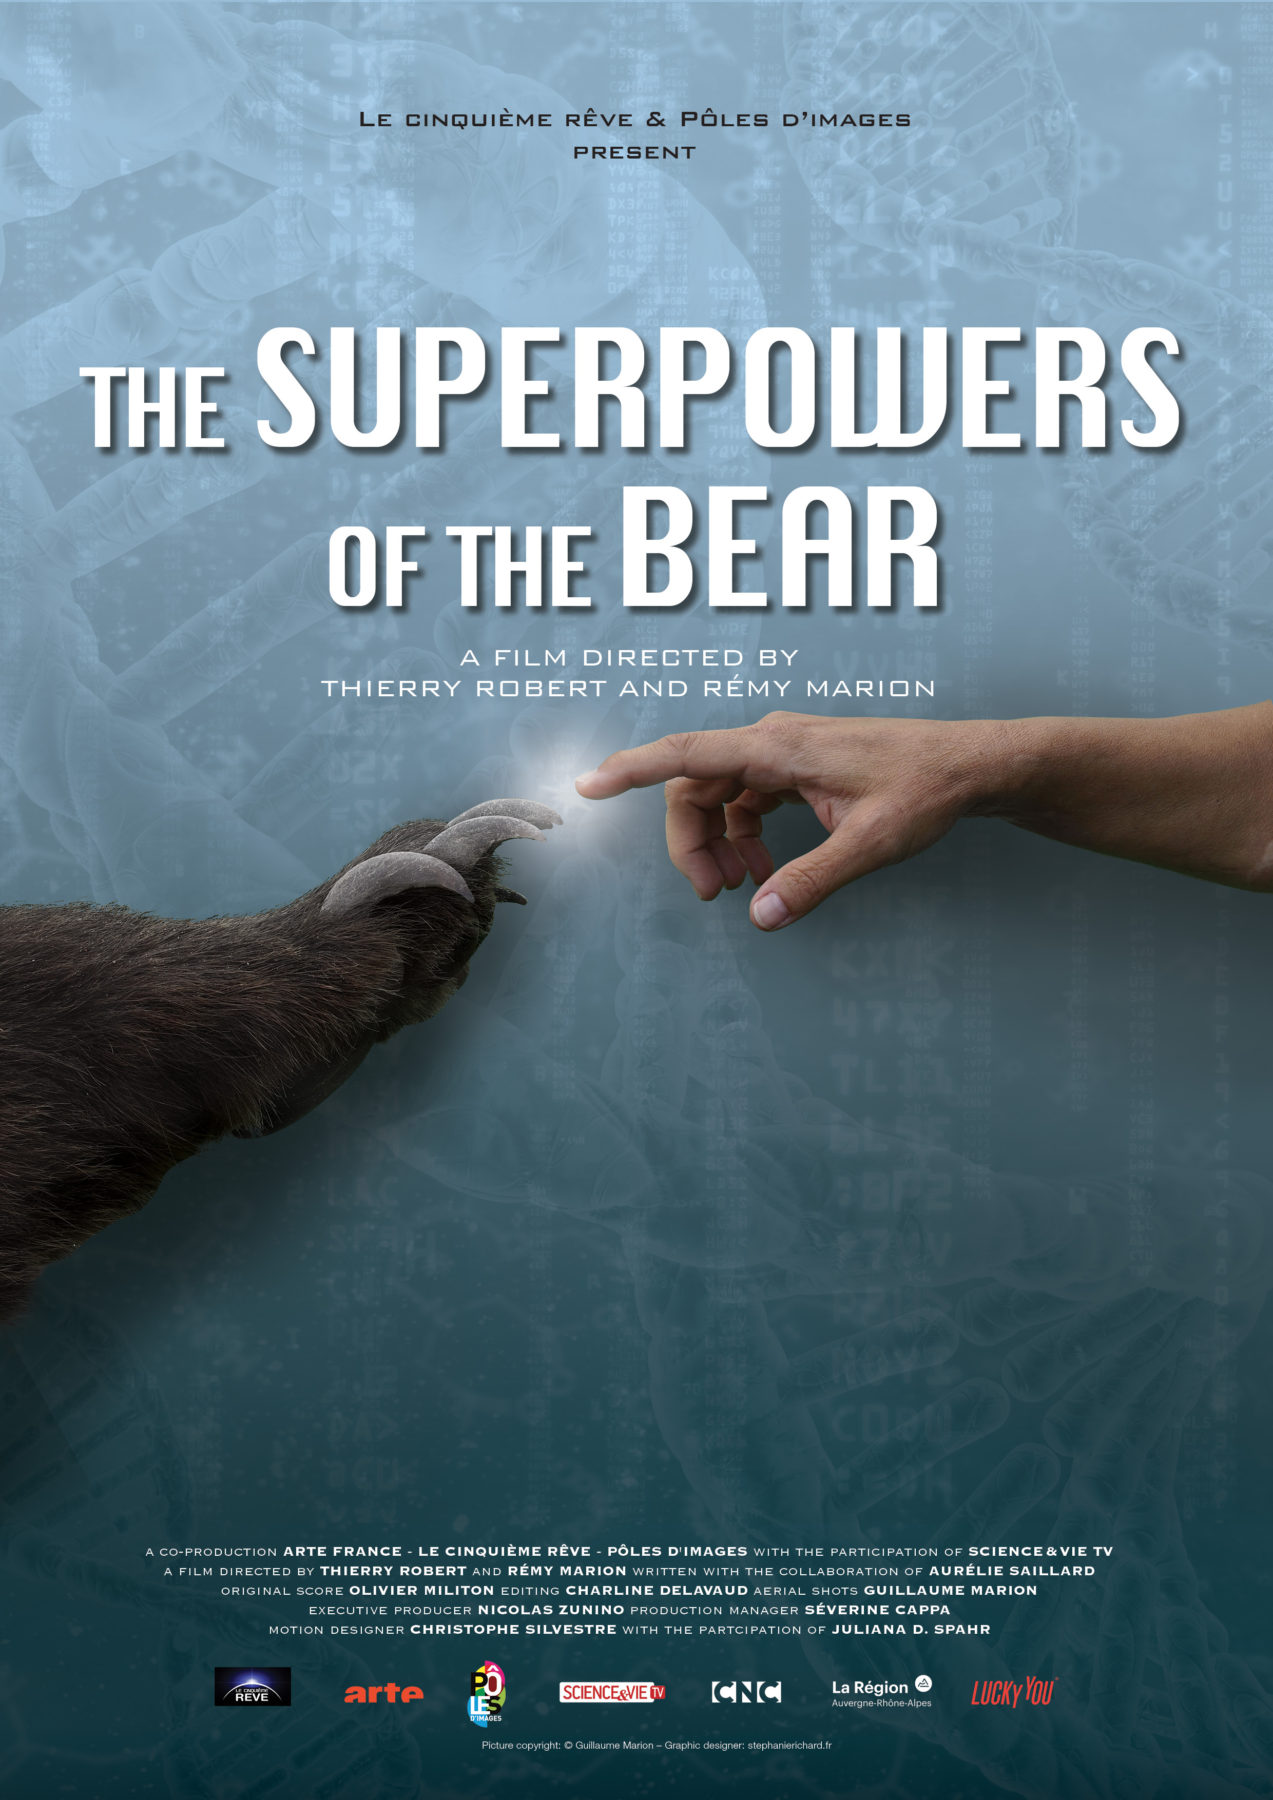 The Superpowers of the bear